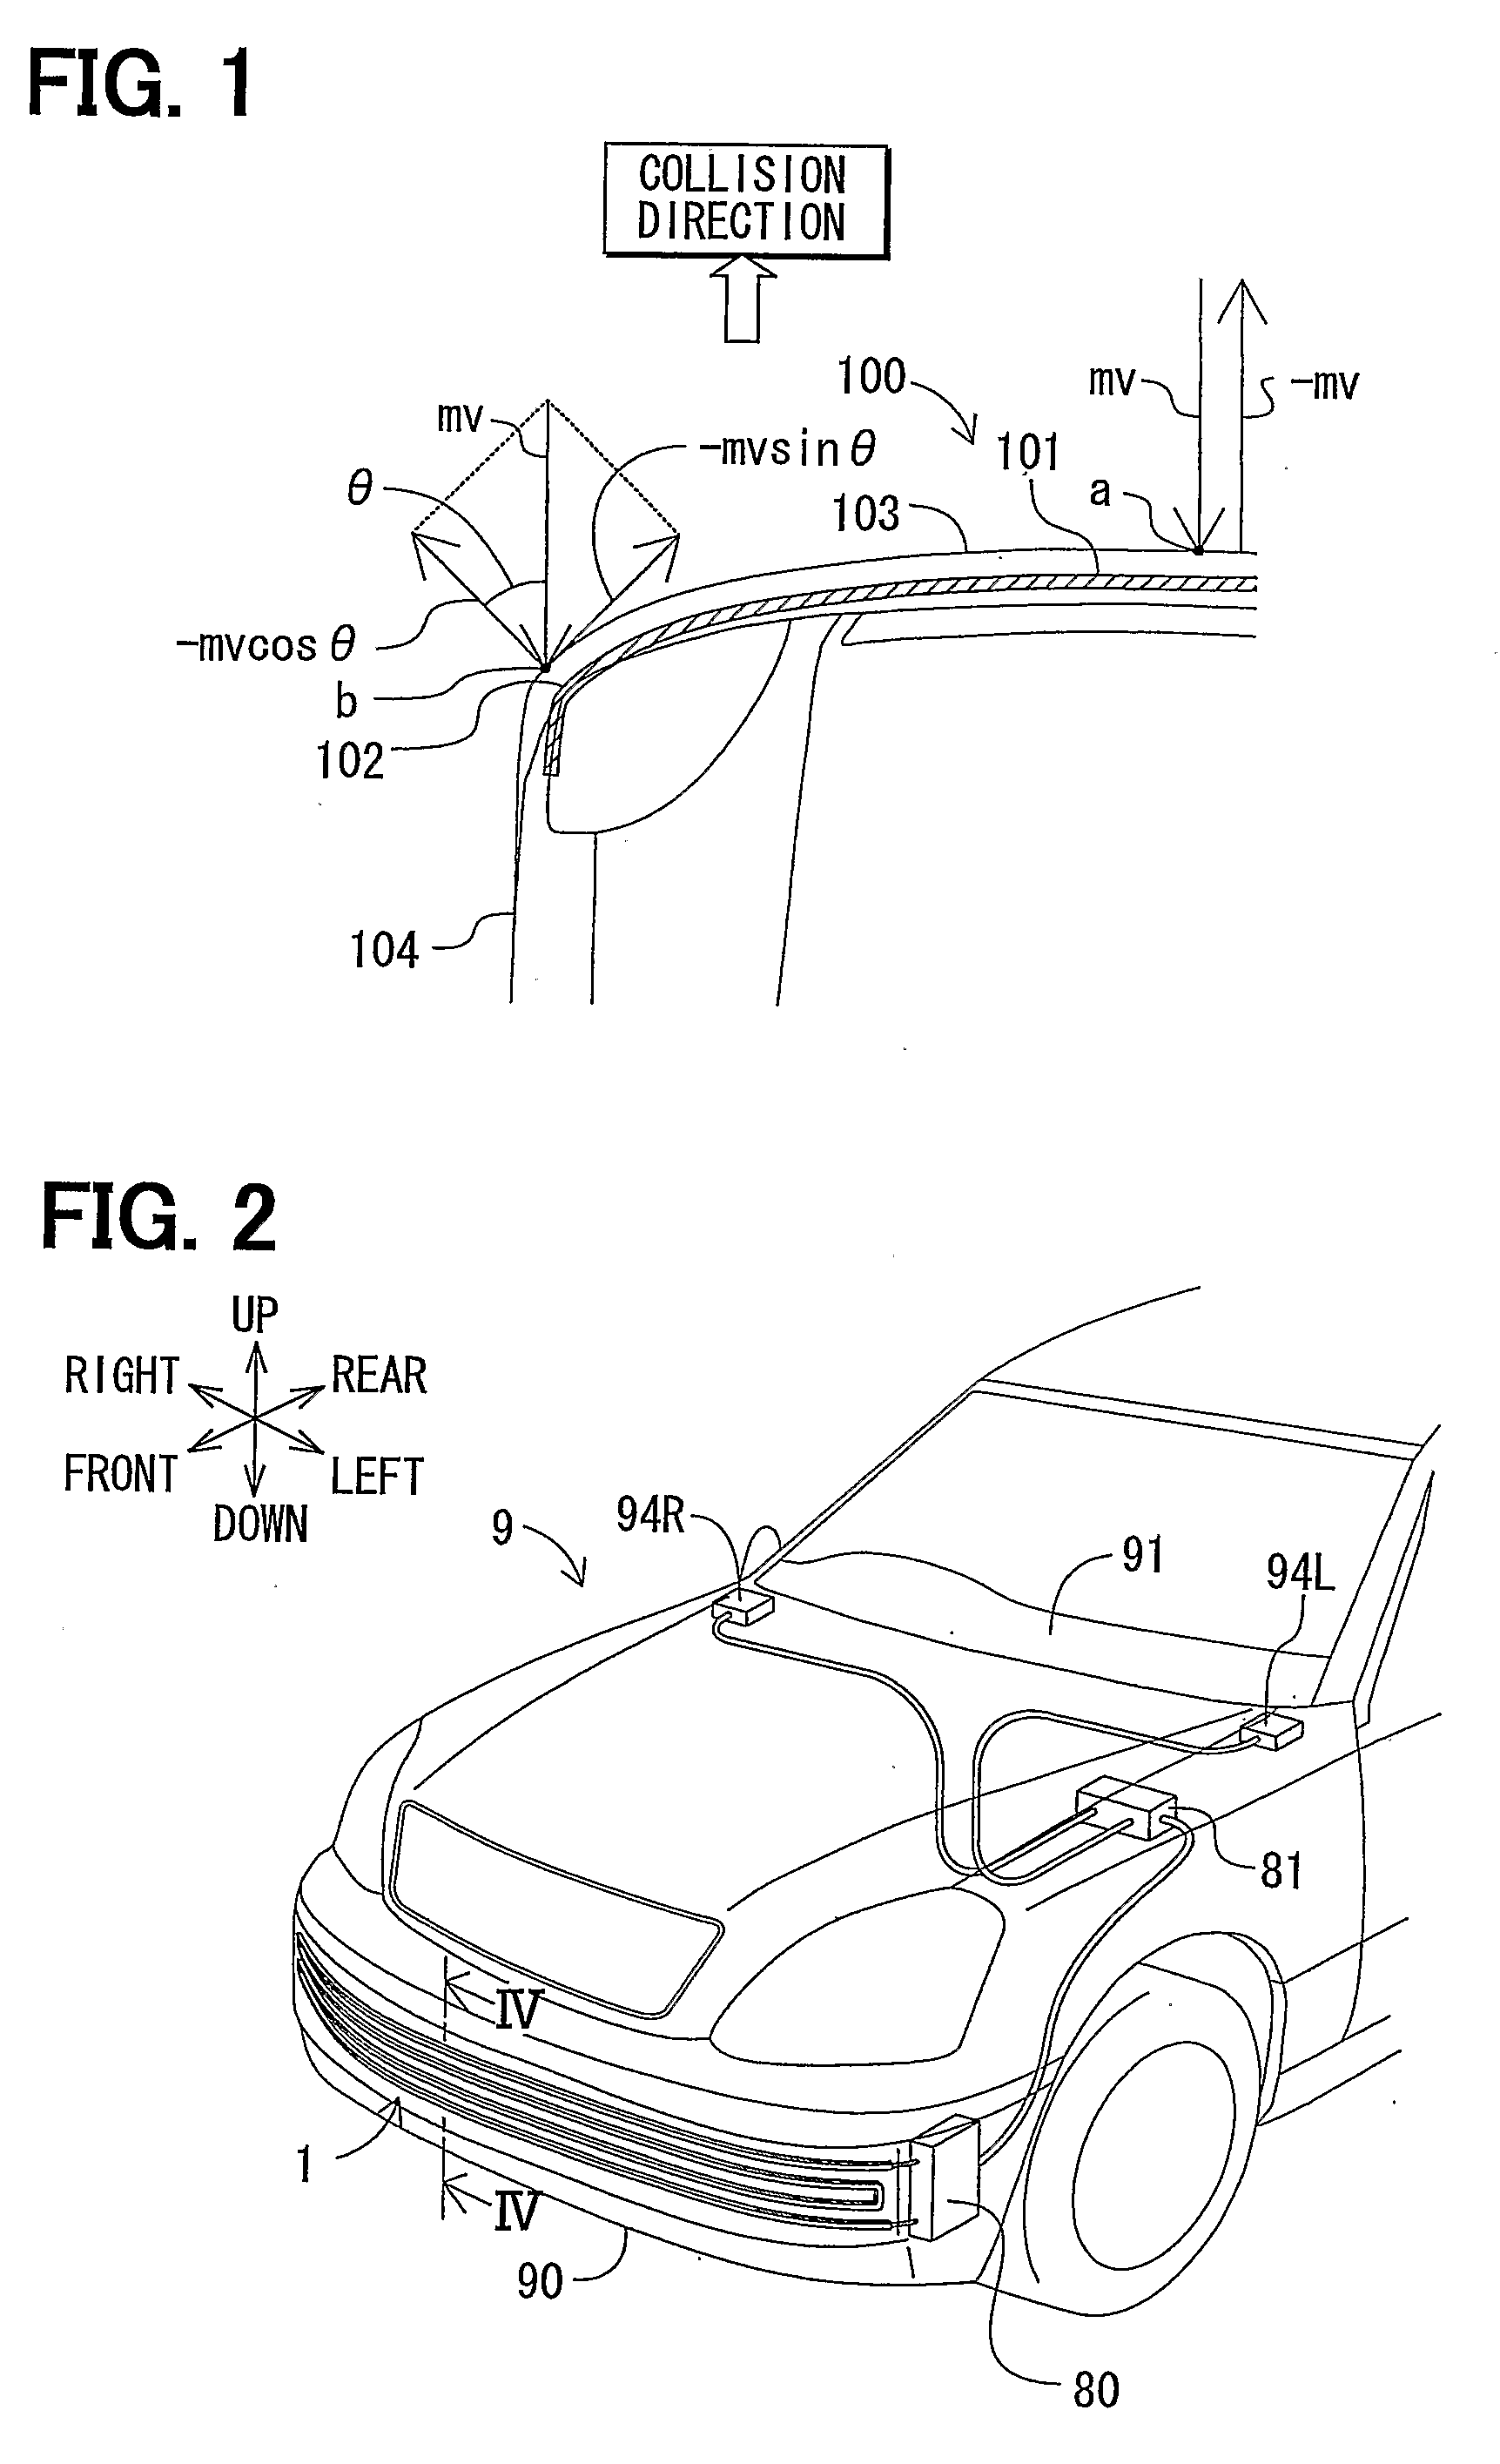 Collision Detection Device and Method of Manufacturing the Same